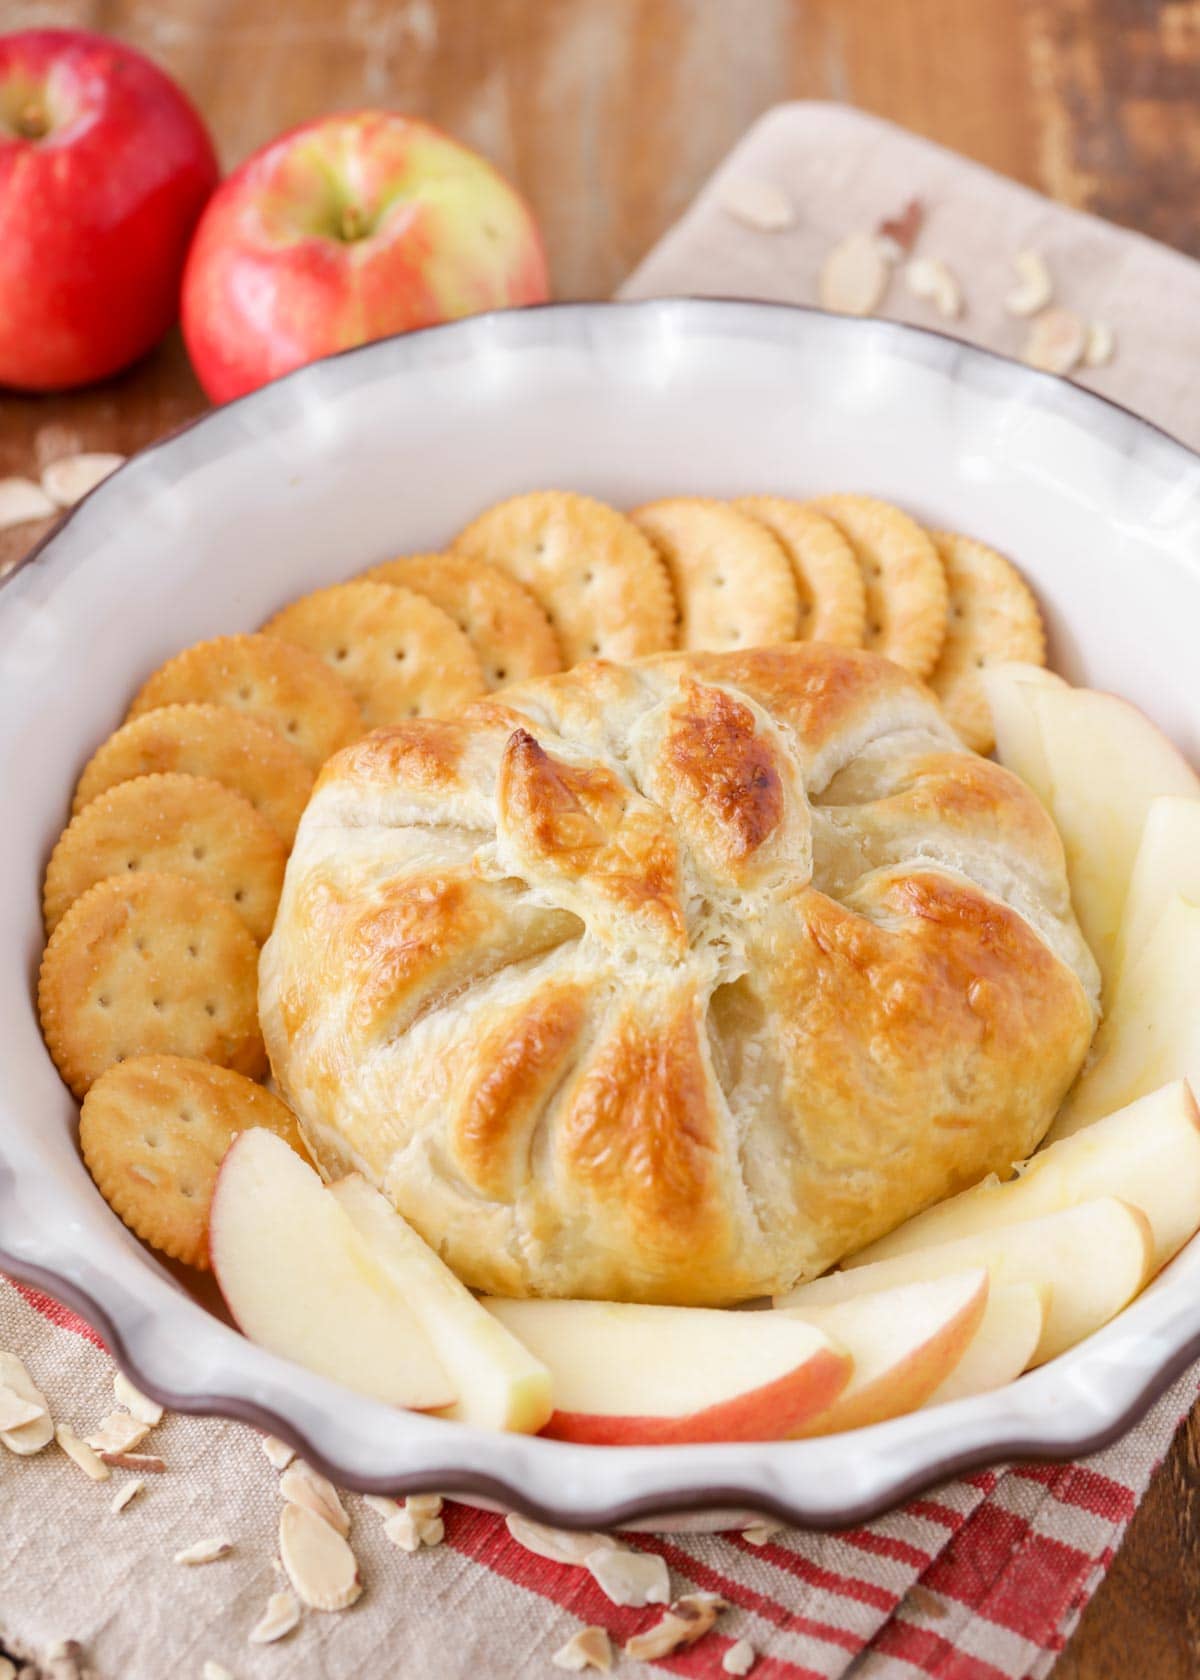 Baked brie in puff pastry served with apple slices and crackers.